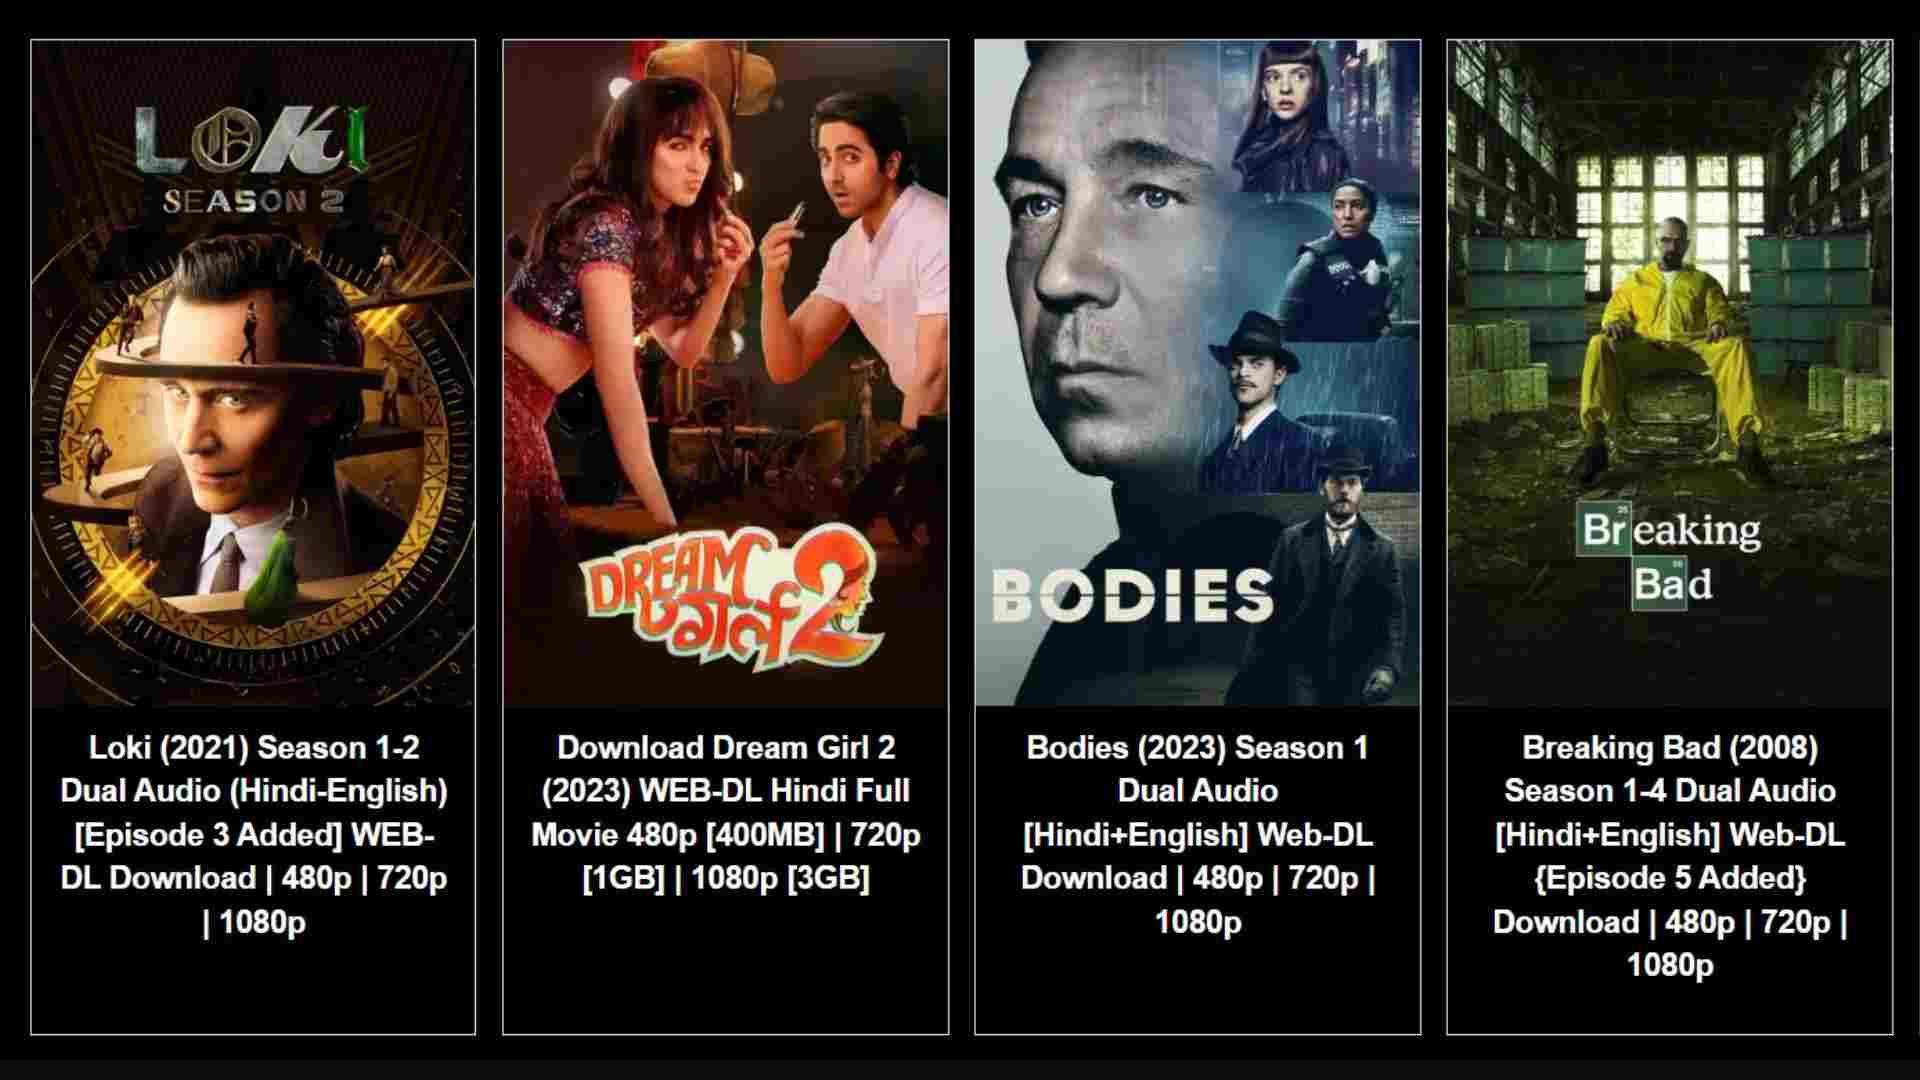 What are the Rules and Regulations for using hdmovieshub?